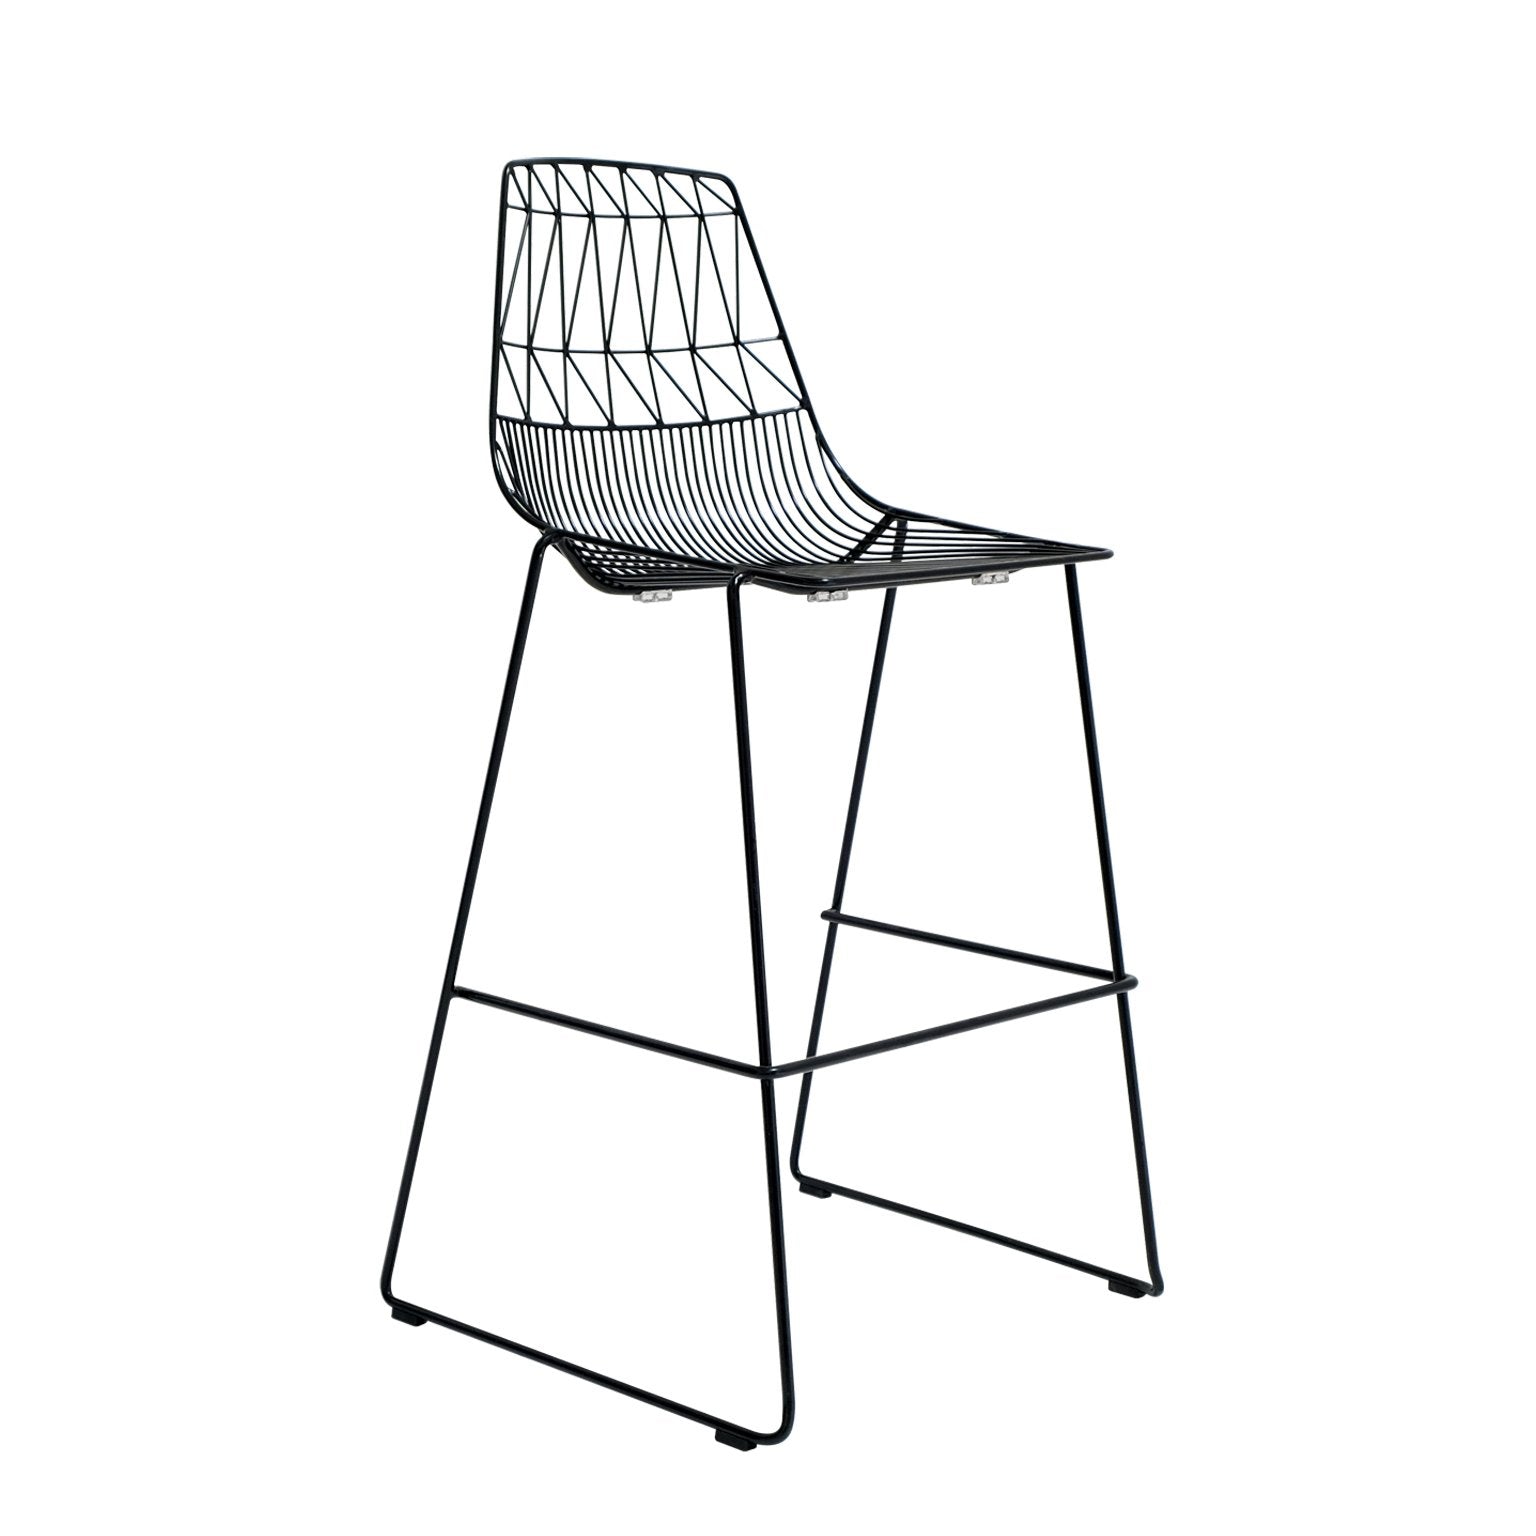 Lucy Stool / Stacking